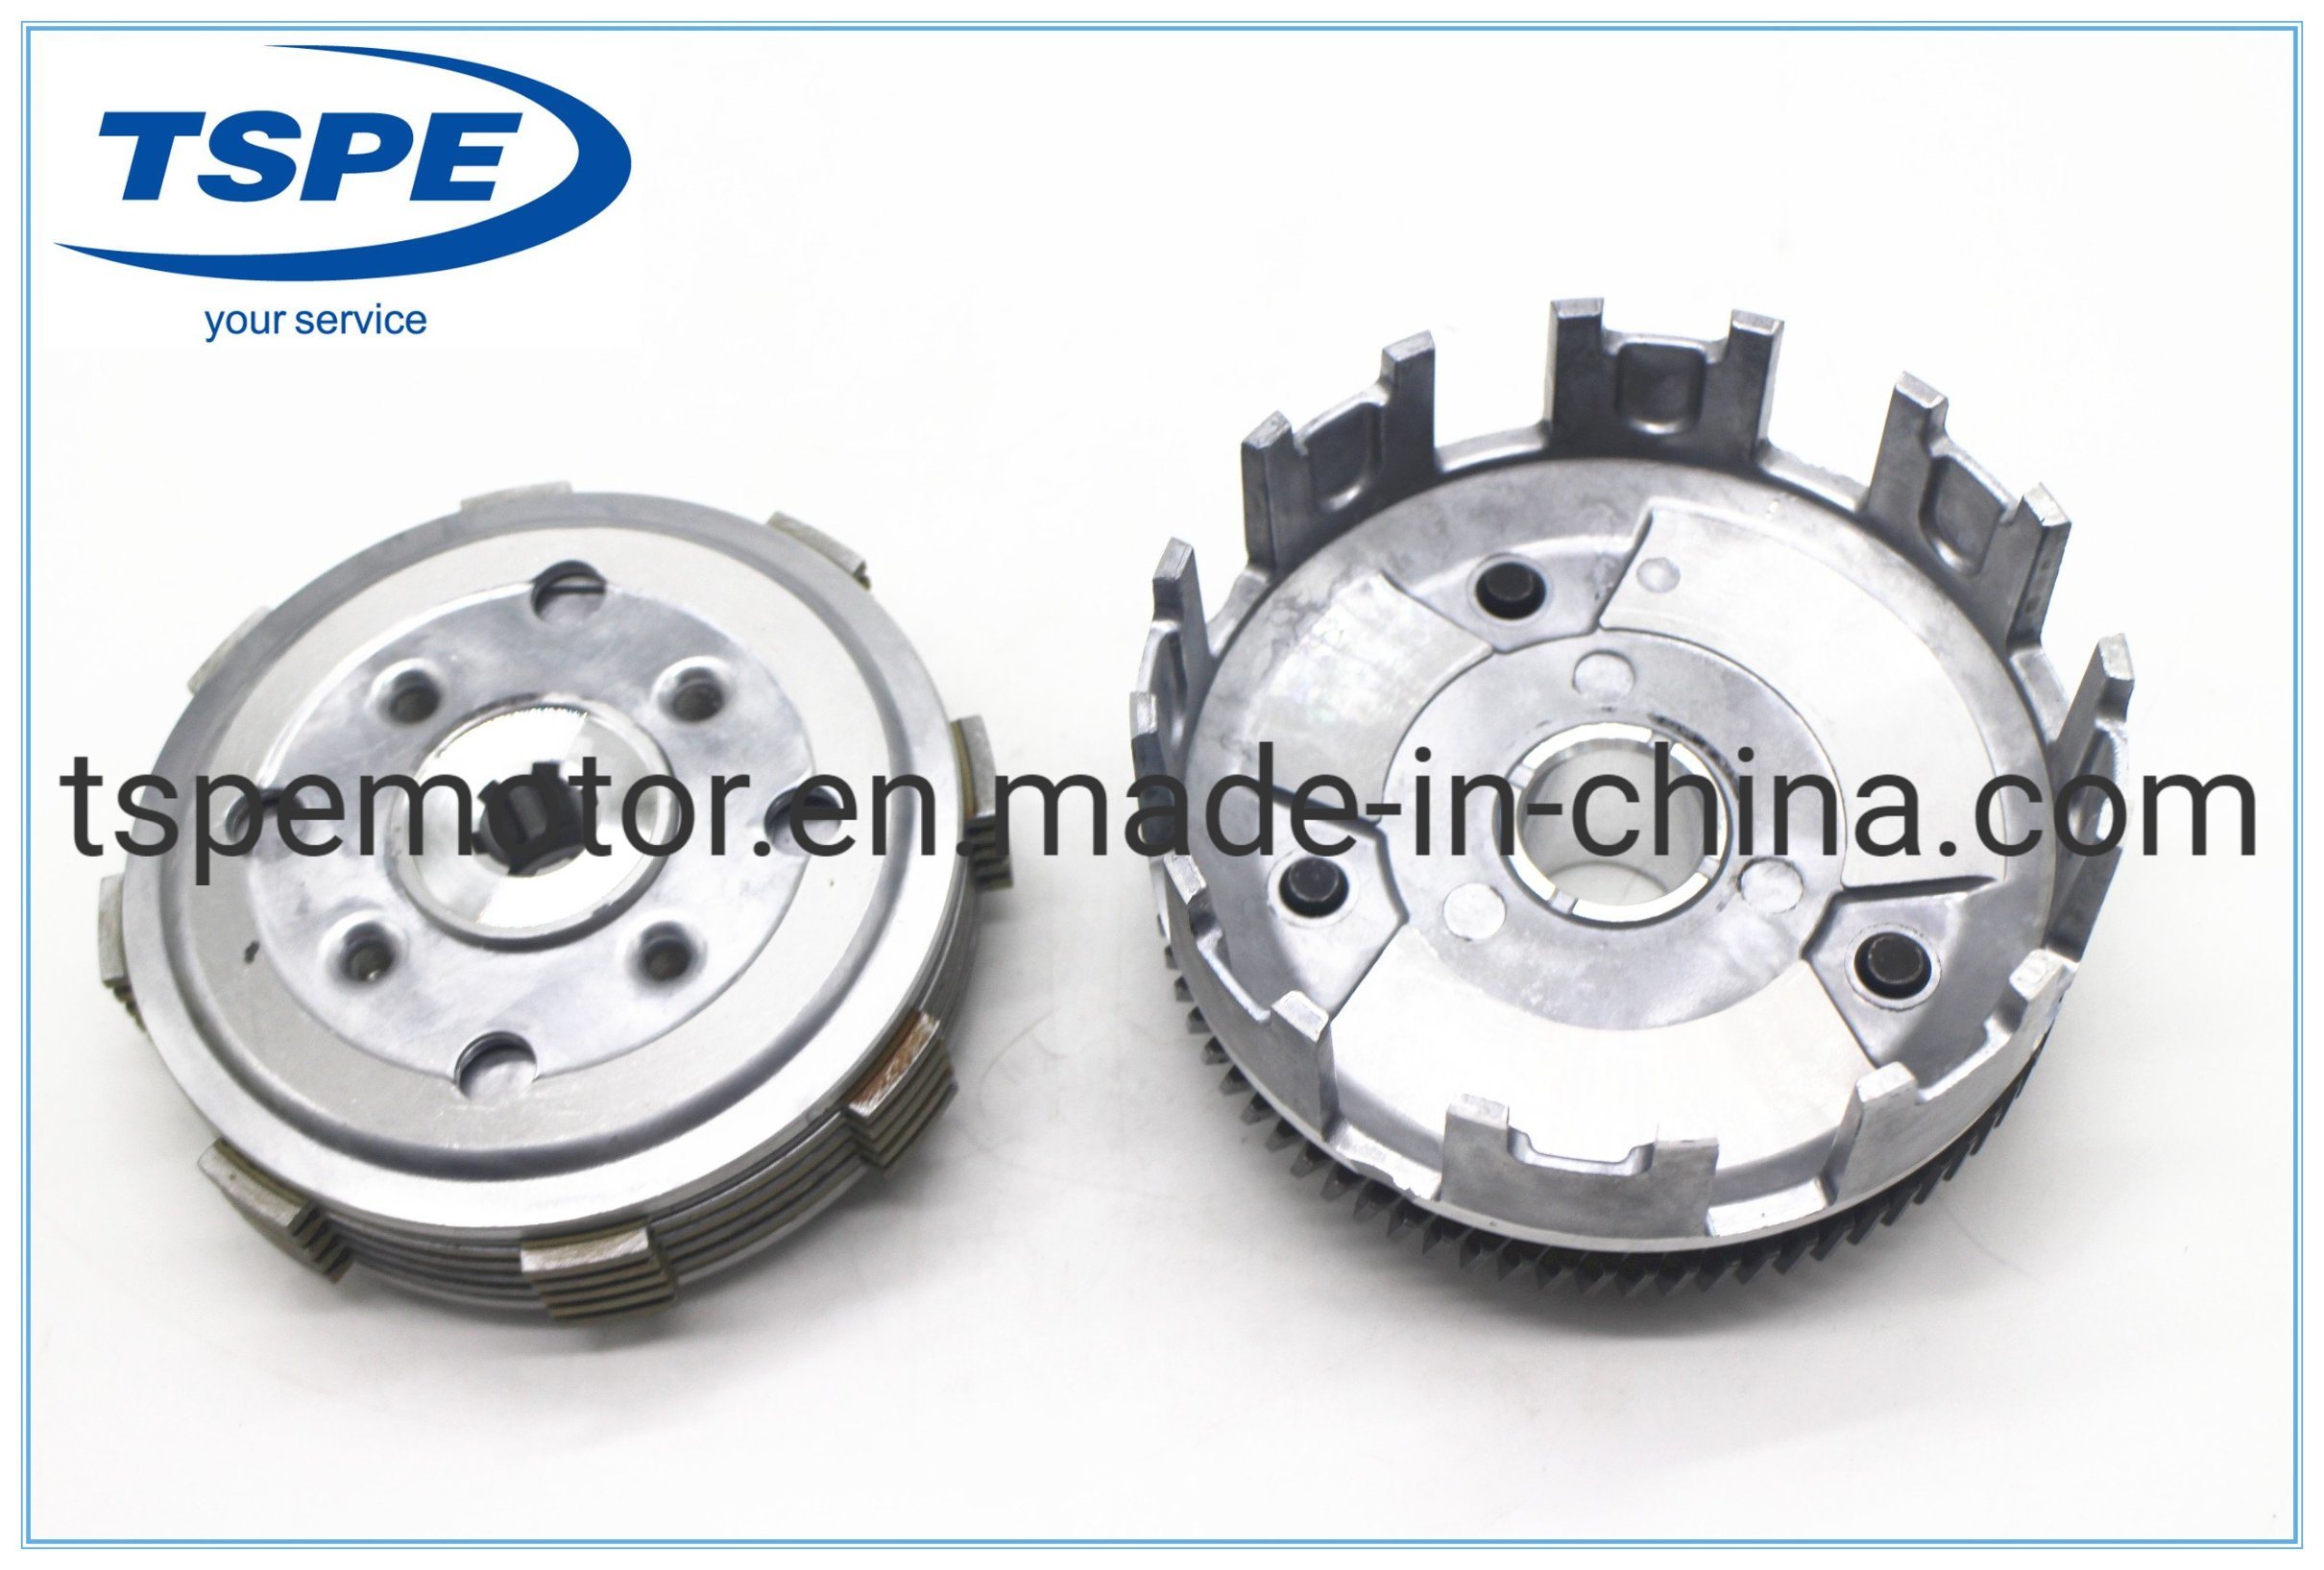 Motorcycle Engine Clutch Assy Clutch Completo for Pulsar Ns200